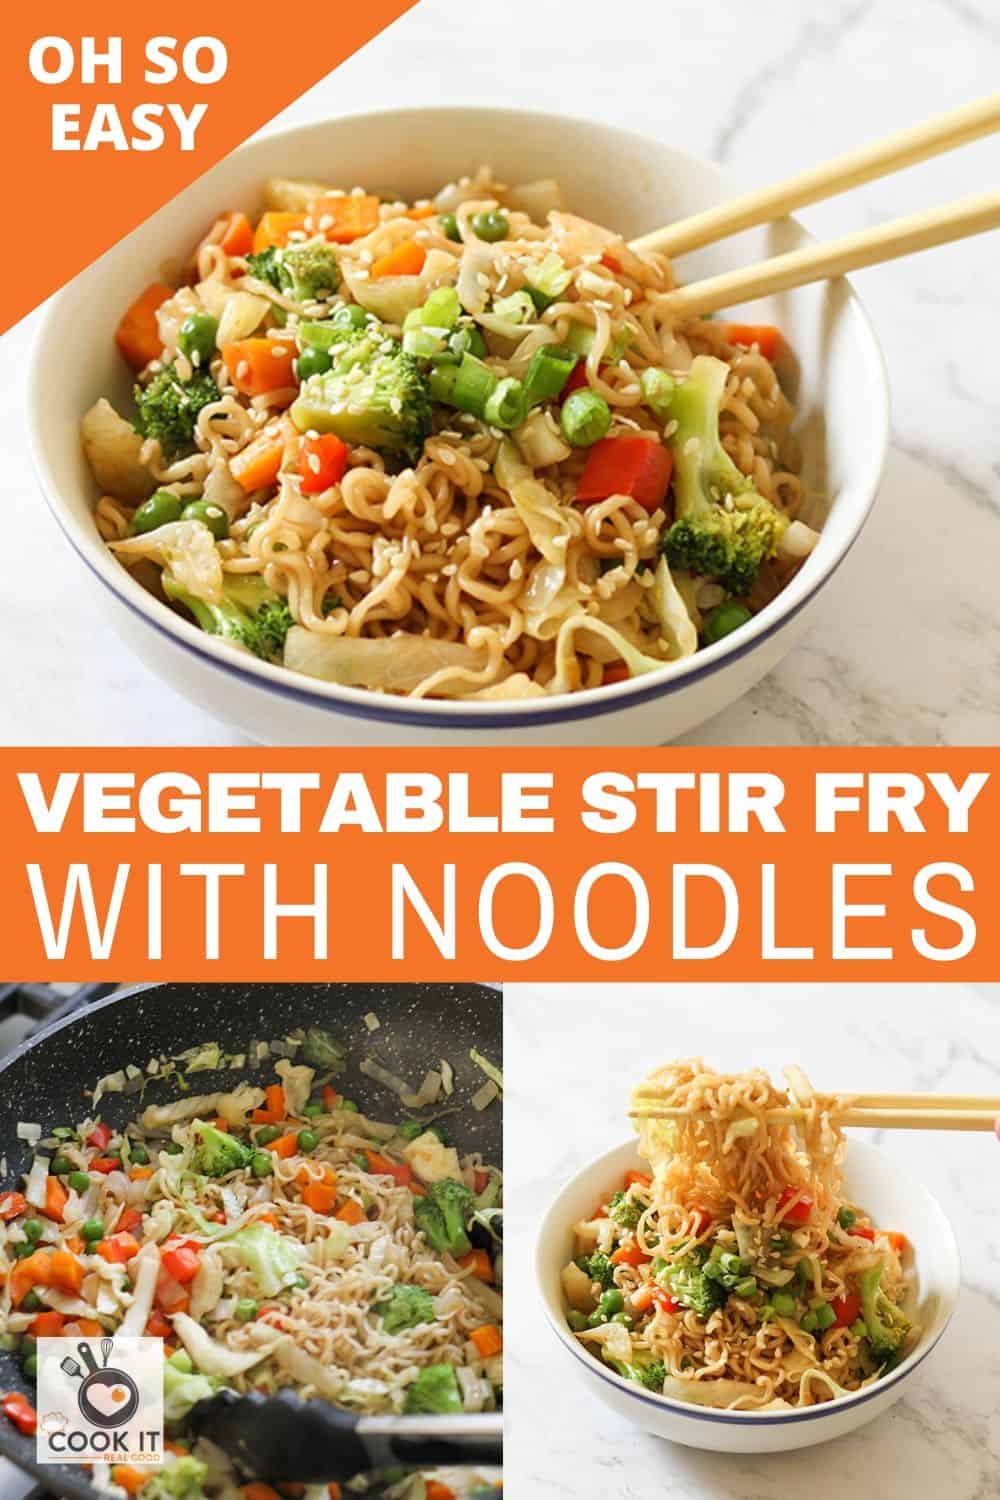 Vegetable Stir Fry with Noodles - Cook it Real Good